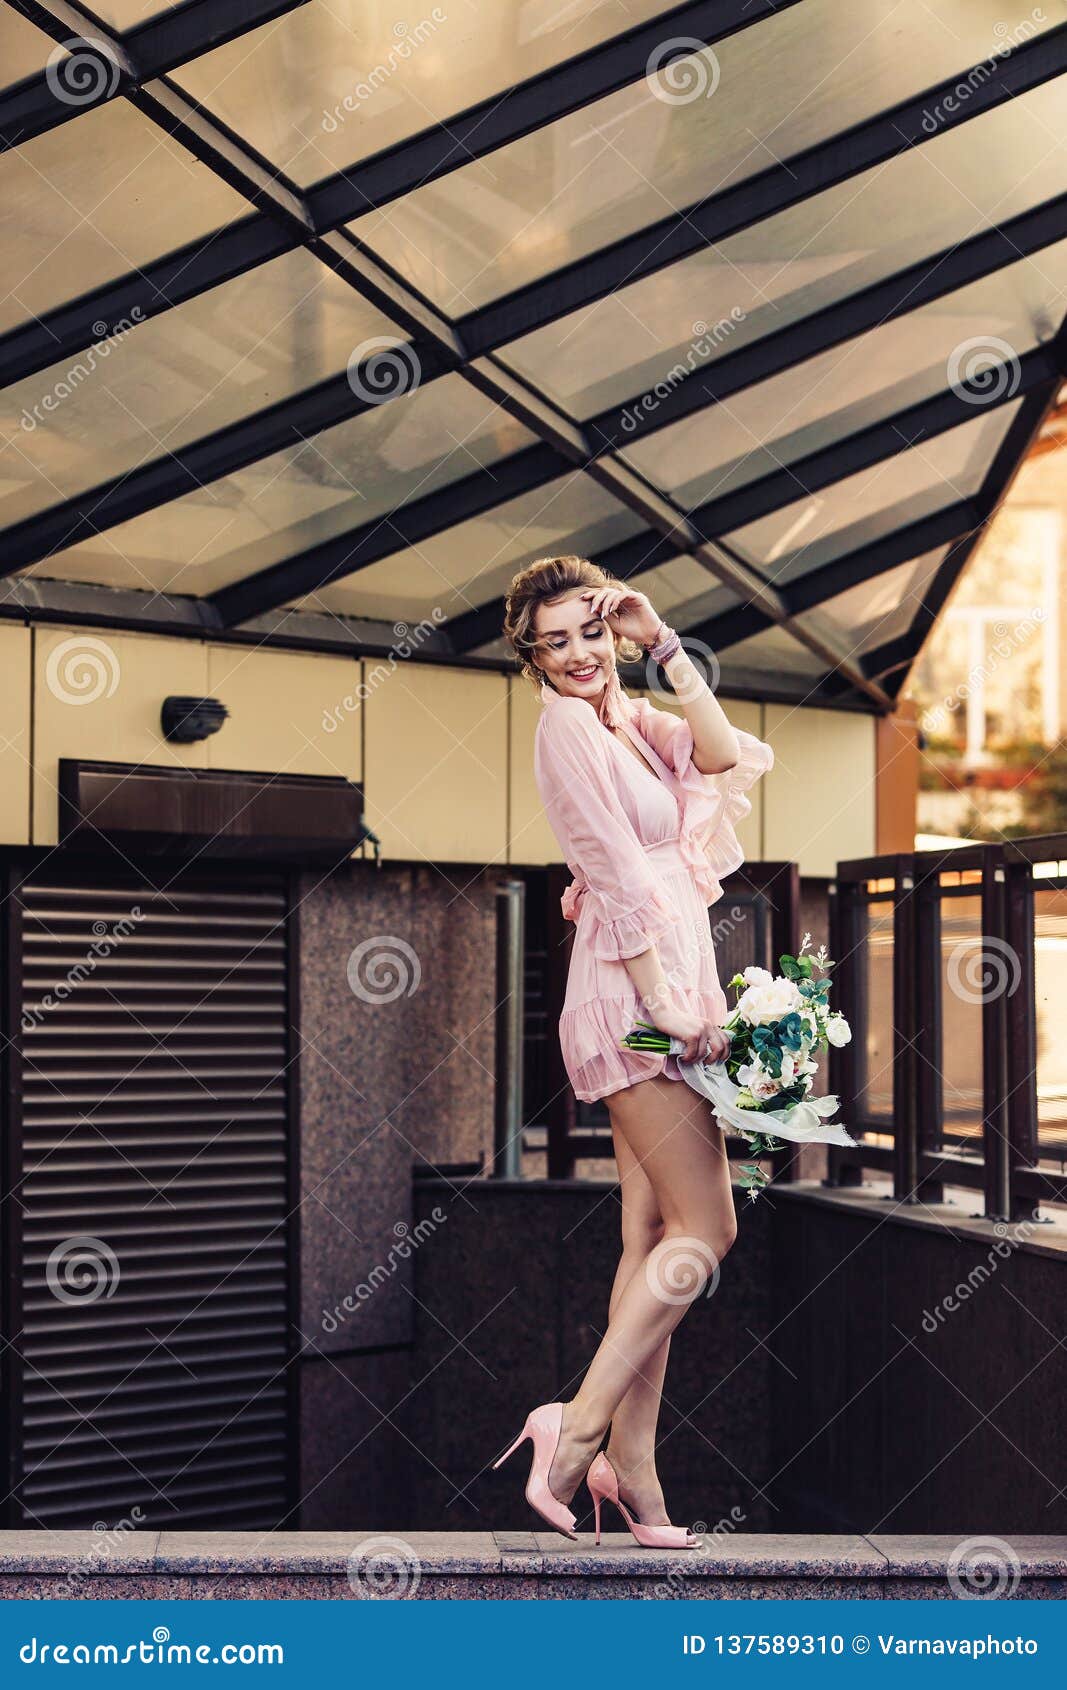 Attractive Young Girl in a Short Dress with a Flower Bouquet Posing on ...